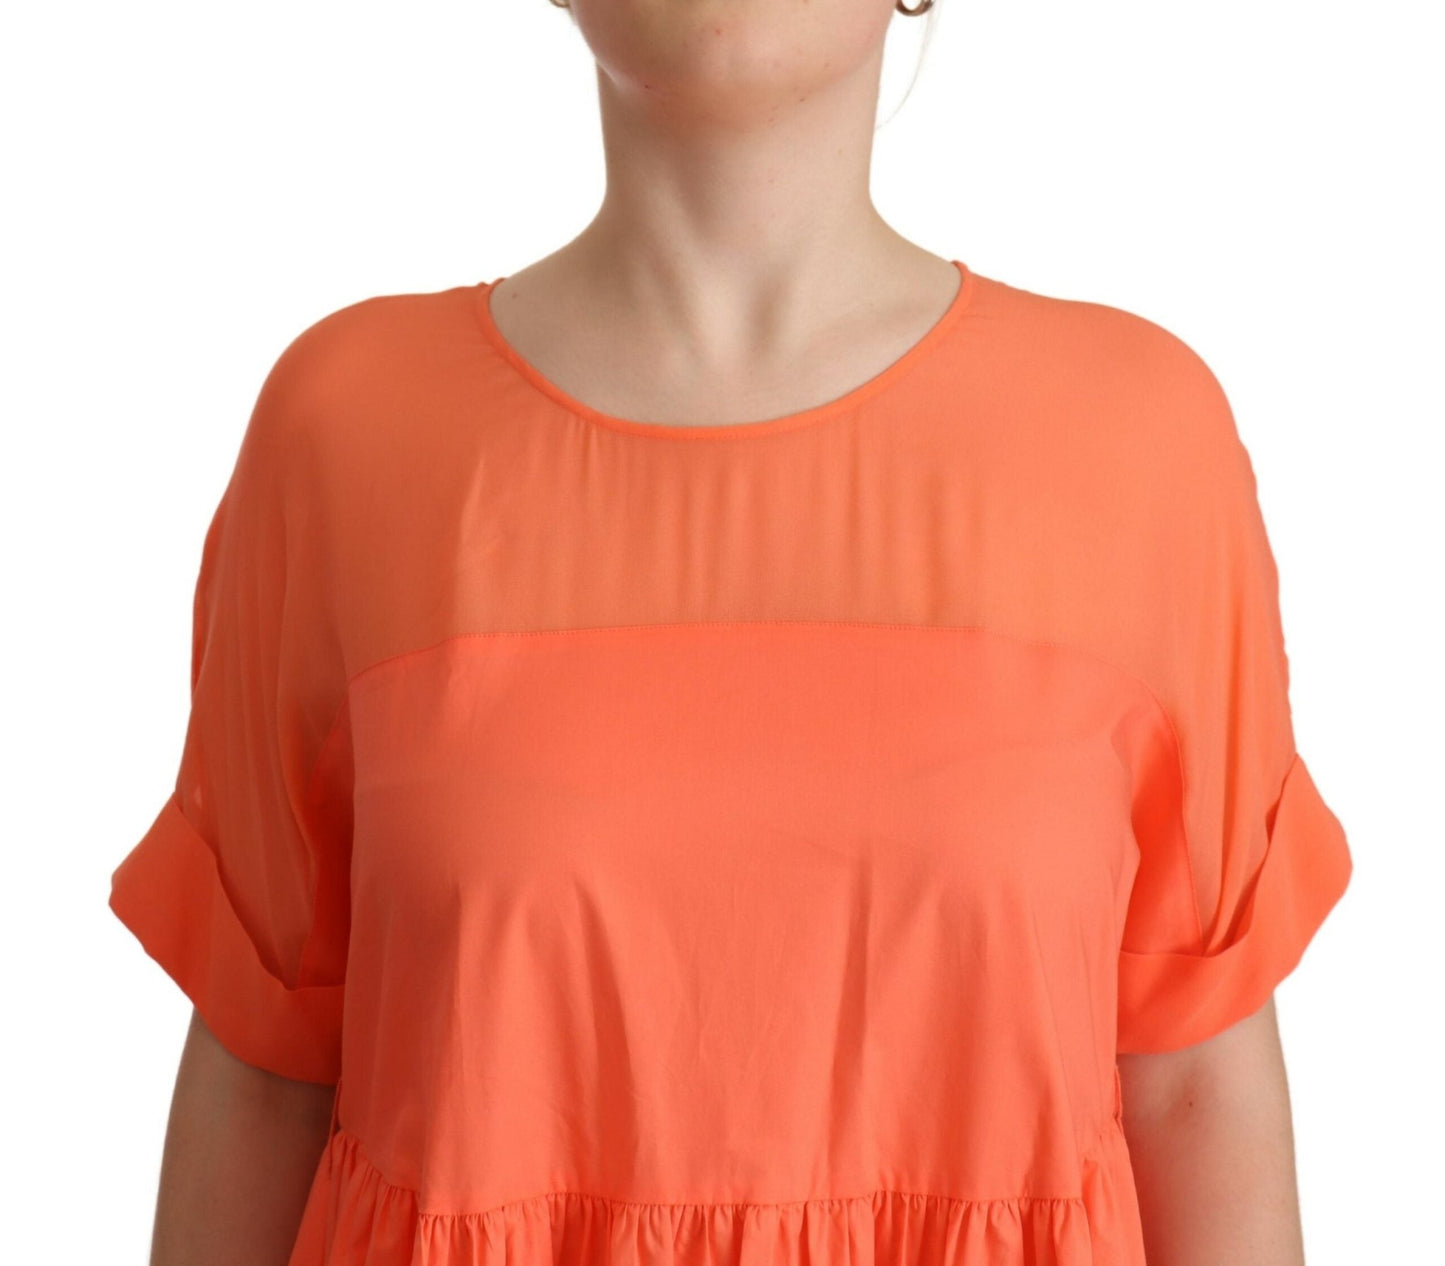 Twinset Elegant Coral Maxi Dress with Short Sleeves